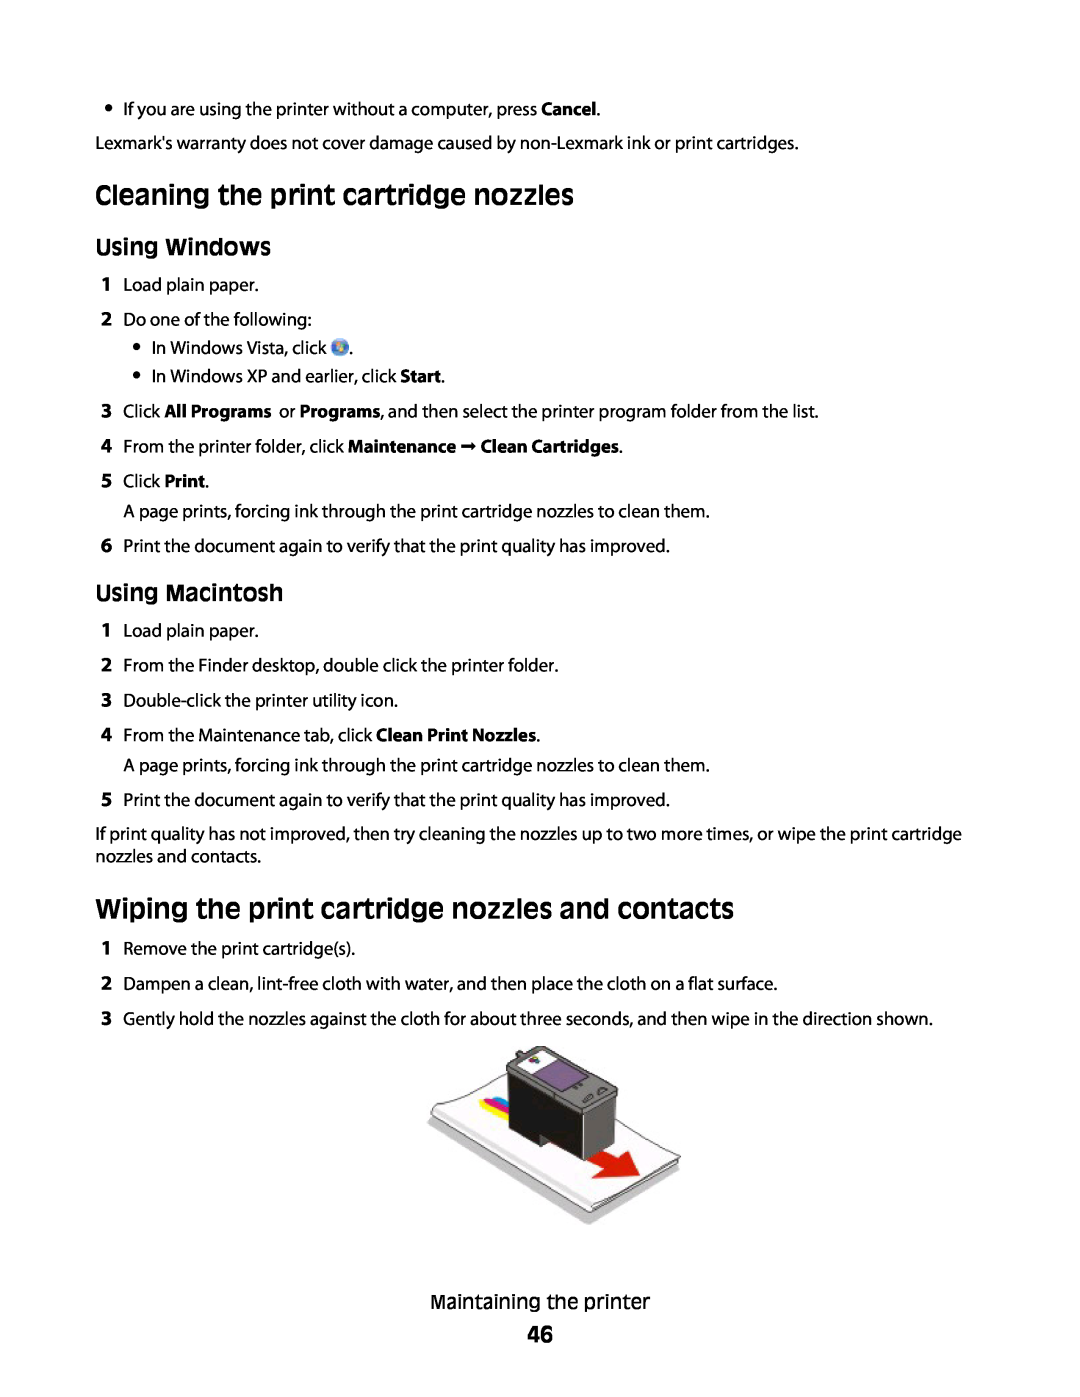 Lexmark 4433, 4445 Cleaning the print cartridge nozzles, Wiping the print cartridge nozzles and contacts, Using Windows 